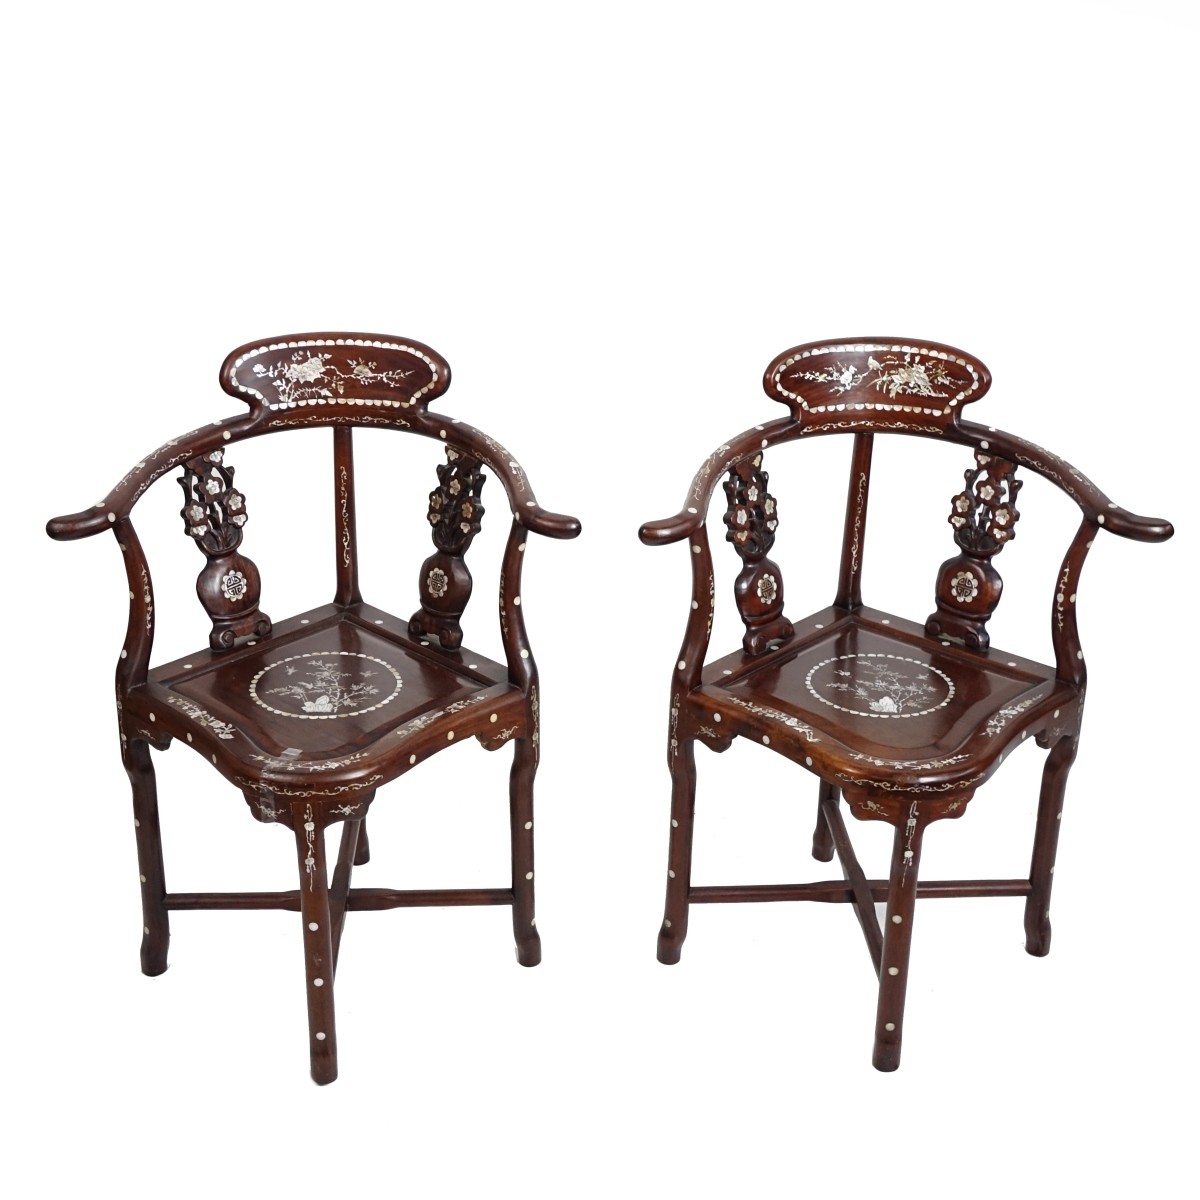 Pair of Chinese Hardwood/MOP Chairs